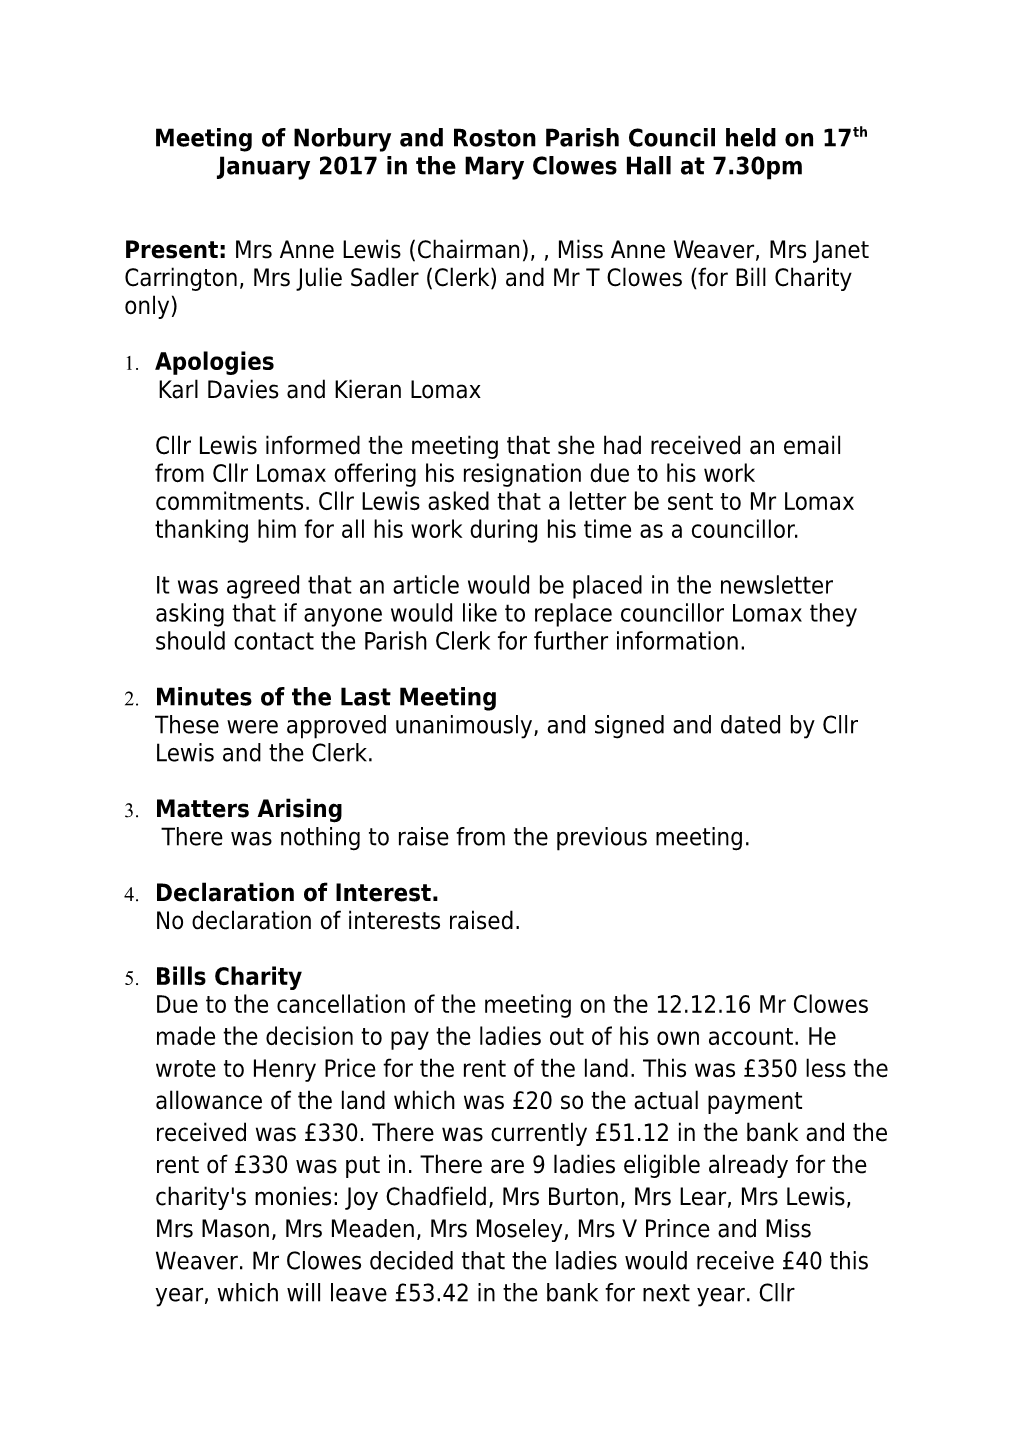 Meeting of Norbury and Roston Parish Council Held on 17Th January 2017 in the Mary Clowes